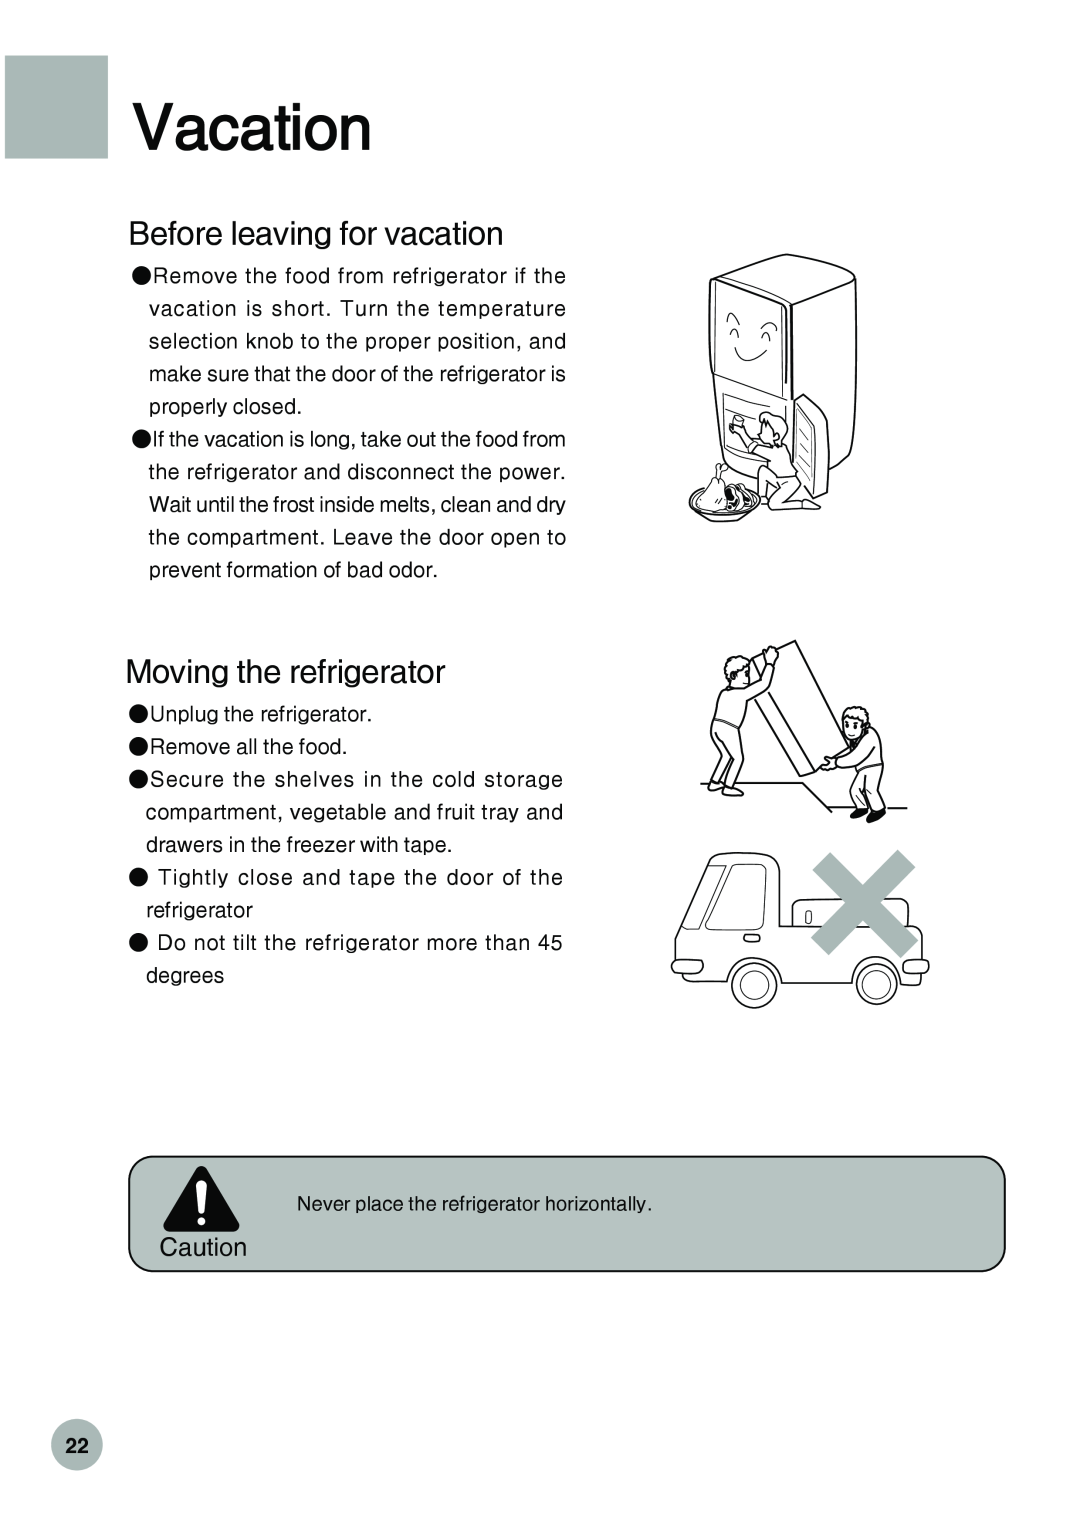 Haier HRF-288K operation manual Before leaving for vacation, Moving the refrigerator, Vacation 